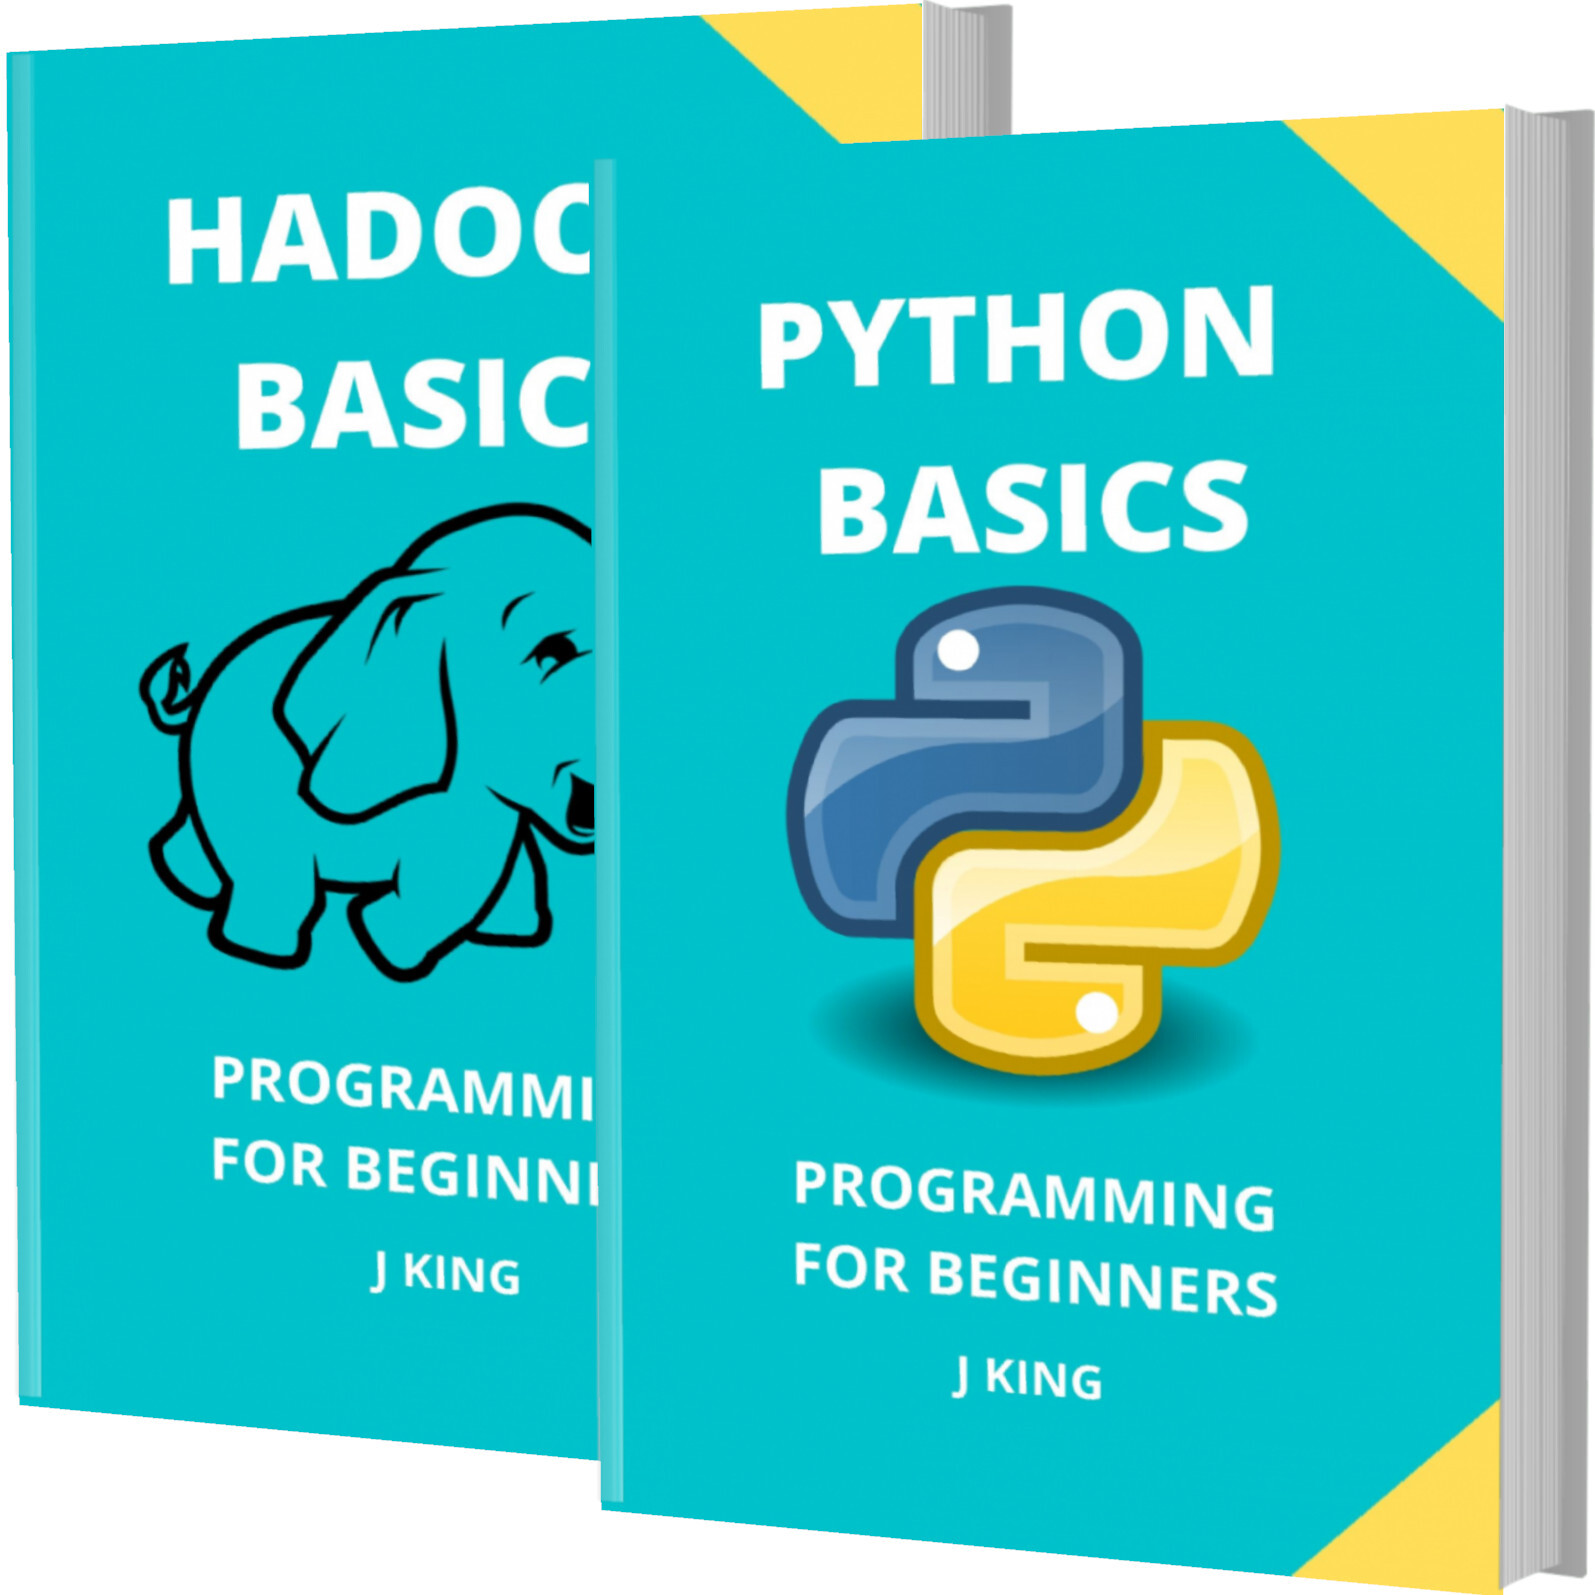 Python and Hadoop Basics Programming for Beginners - 2 Books in 1 - Learn Coding Fast Python and Hadoop Crash Course, A Quickstart Guide, Tutorial Book by Program Examples, In Easy Steps